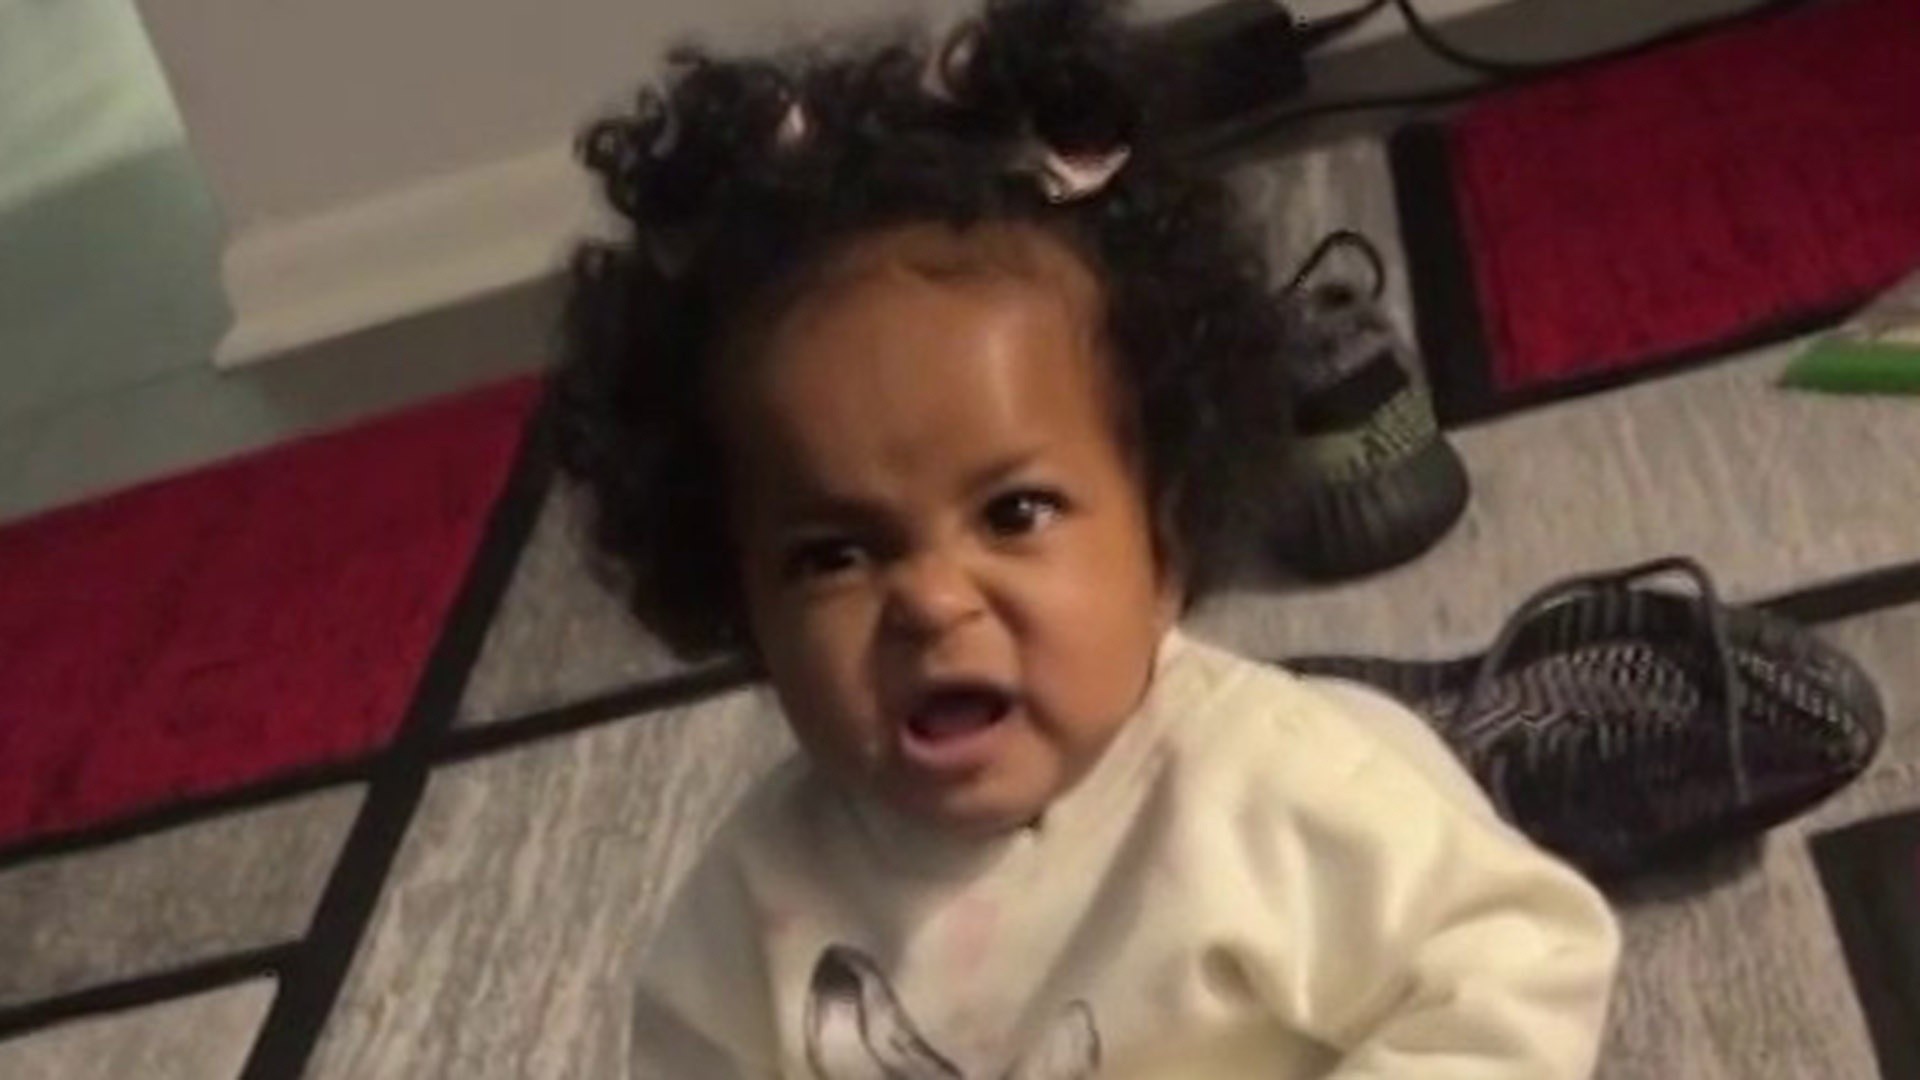 A baby cries after opening a book (funny) on Make a GIF